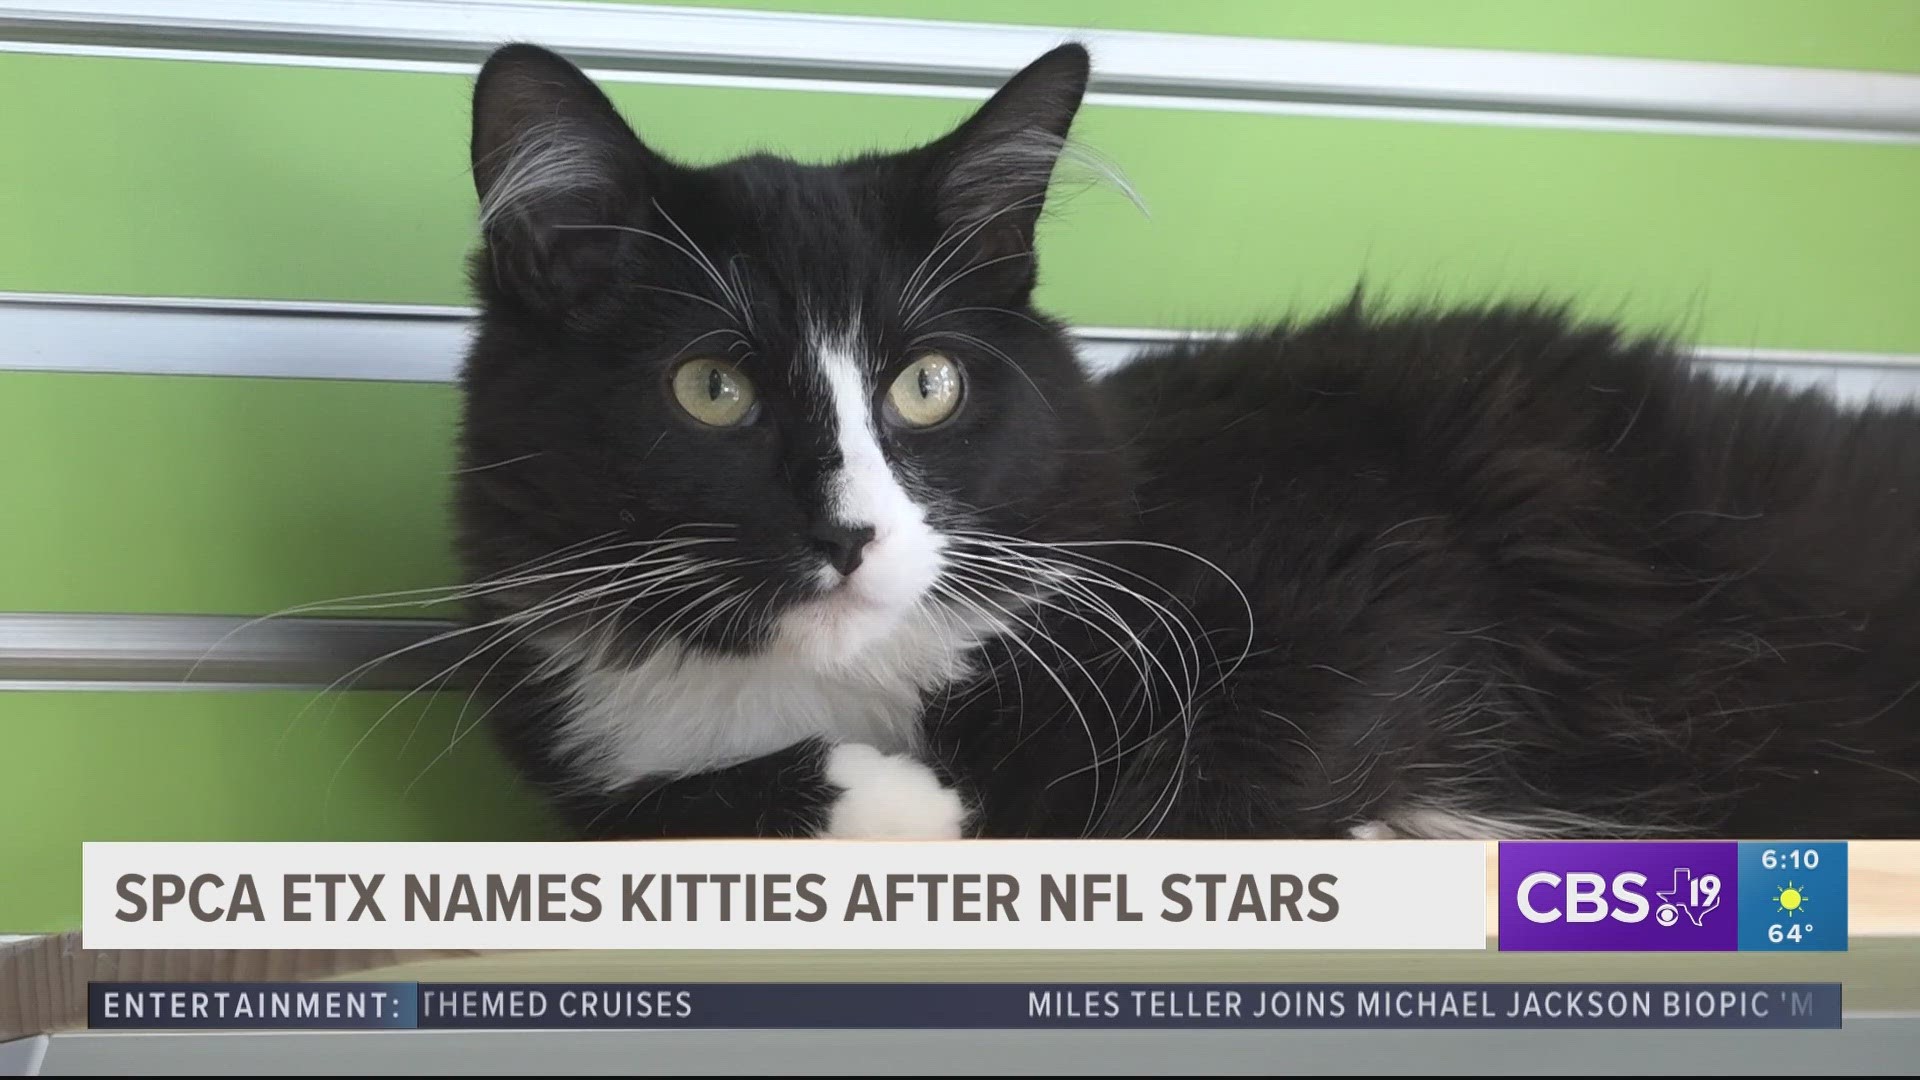 If you're a Chiefs fan you’re in luck because a few kittens at the SPCA of East Texas are rocking some of the team's well known names!